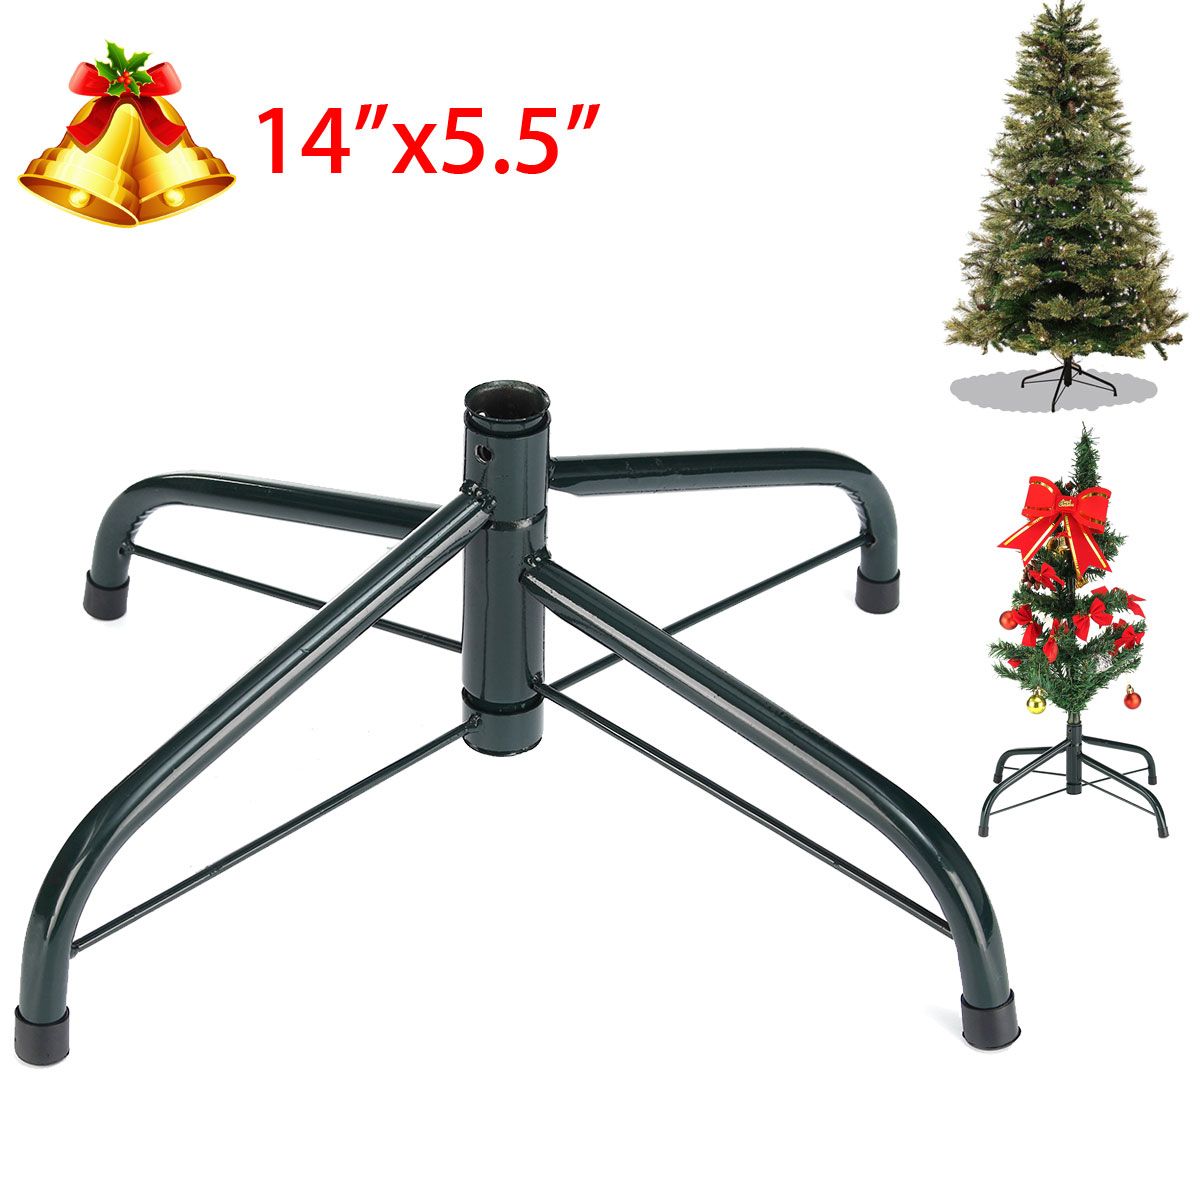 35cm-Cast-Iron-Christmas-Tree-Stand-Green-Metal-Holder-Base-Home-Garden-Decorations-1206264